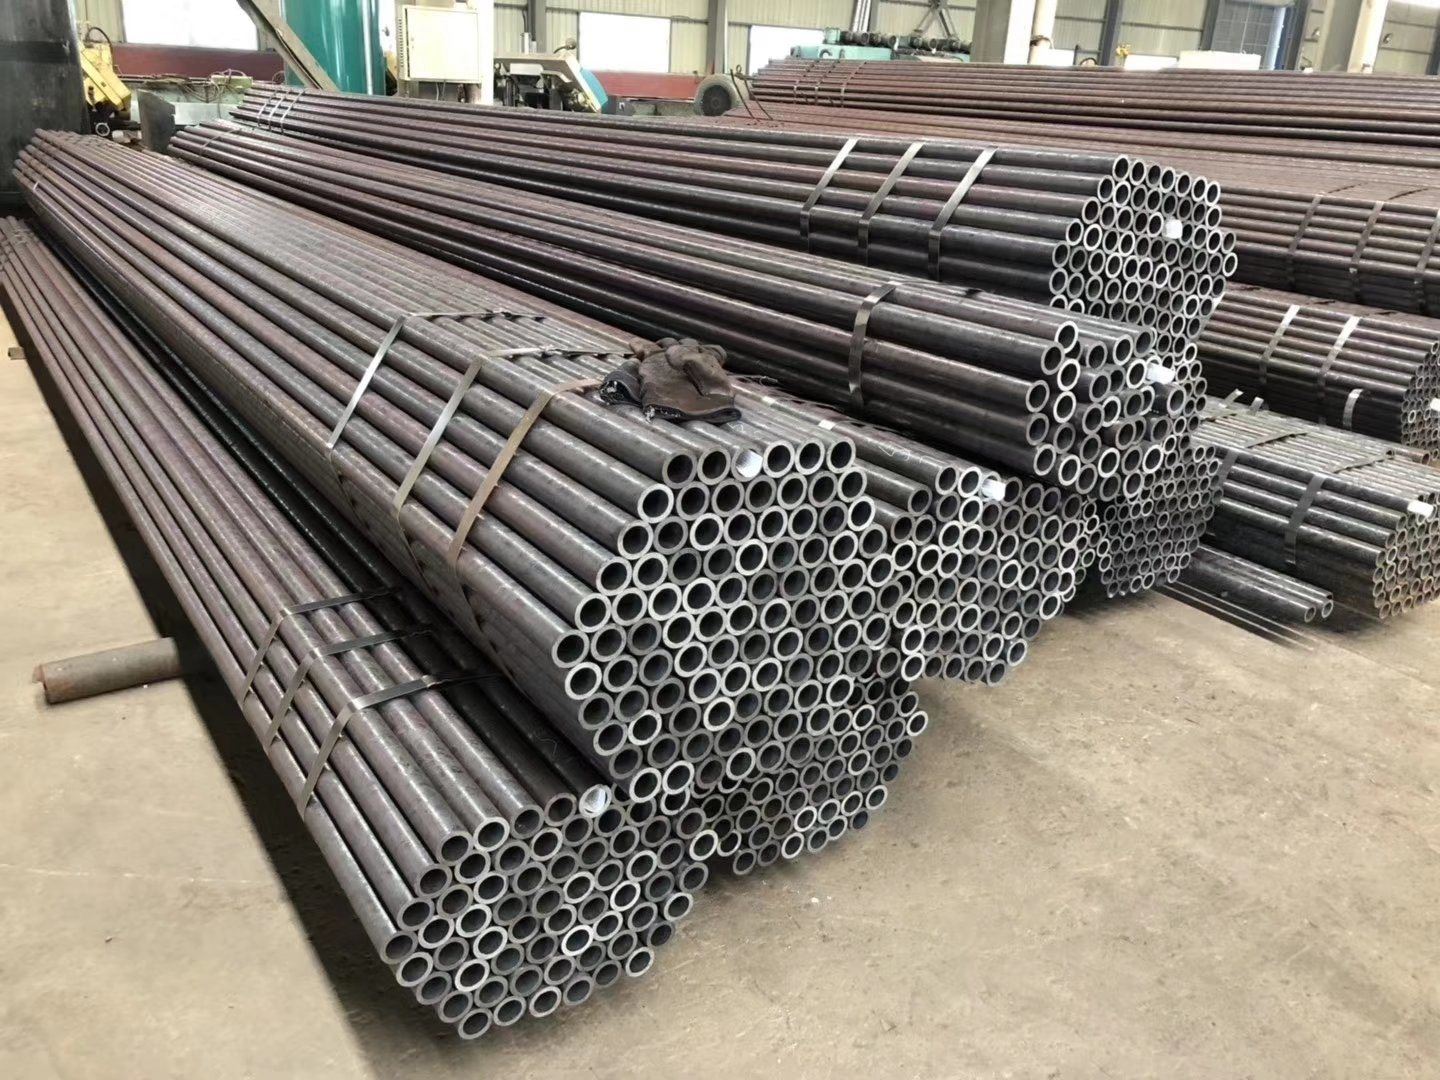 What Is a Seamless Steel Pipe?